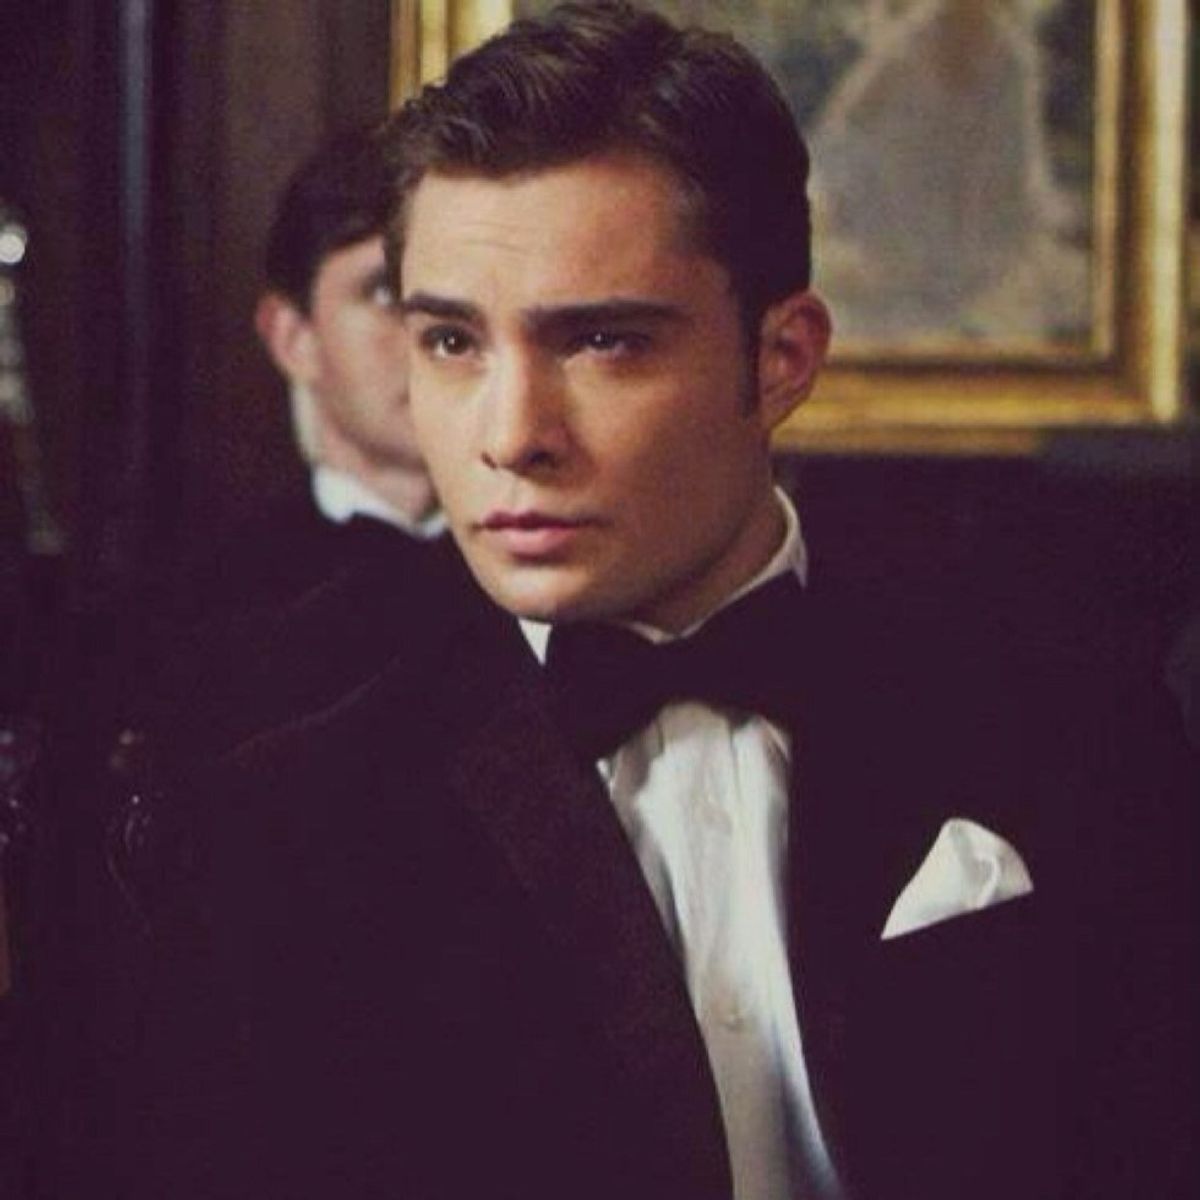 10 Times Chuck Bass Made You Fall Even More In Love